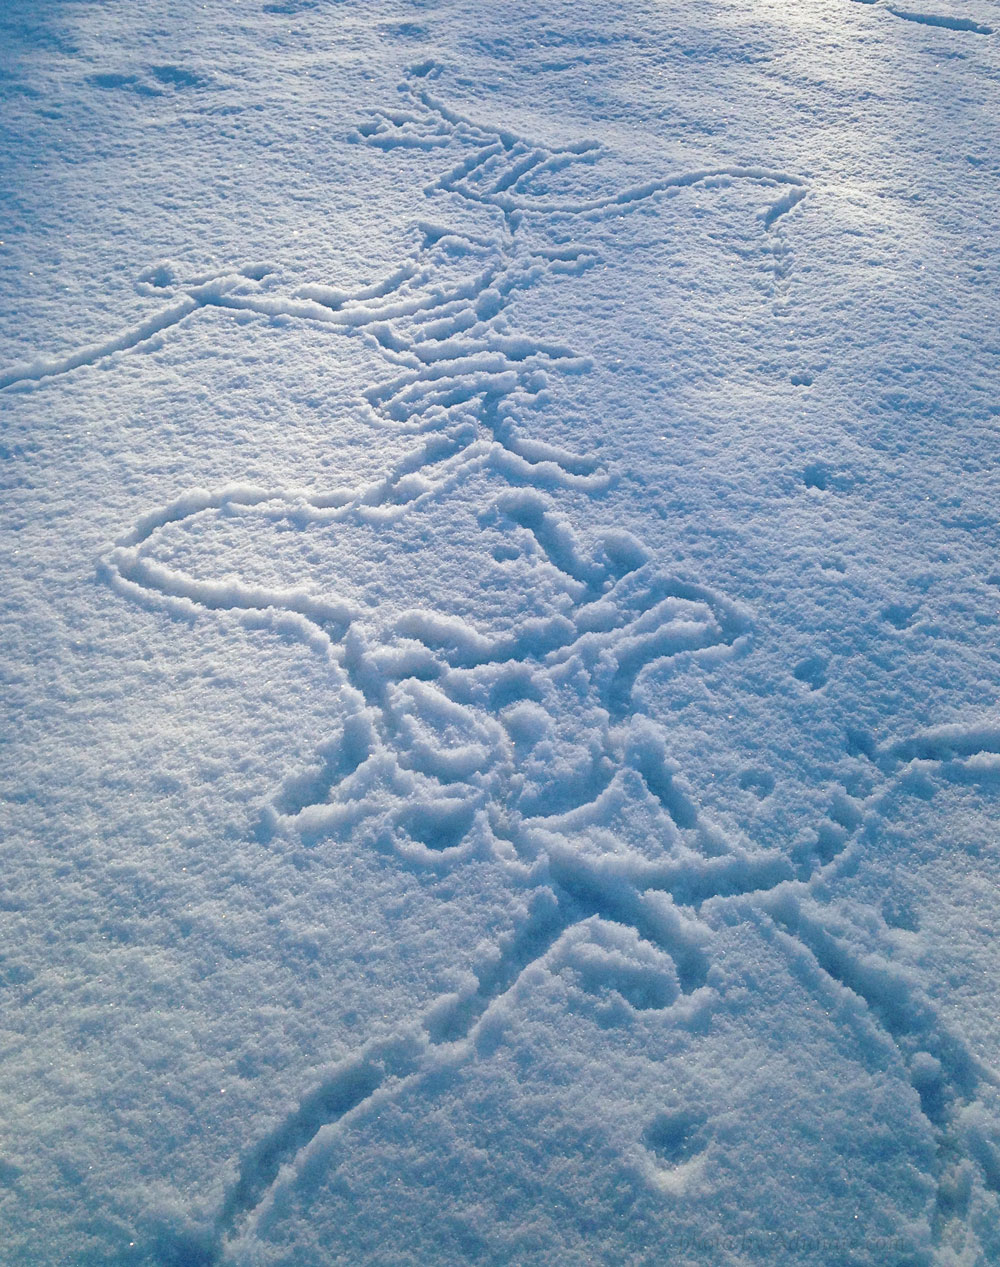 Meadow mouse trail in snow